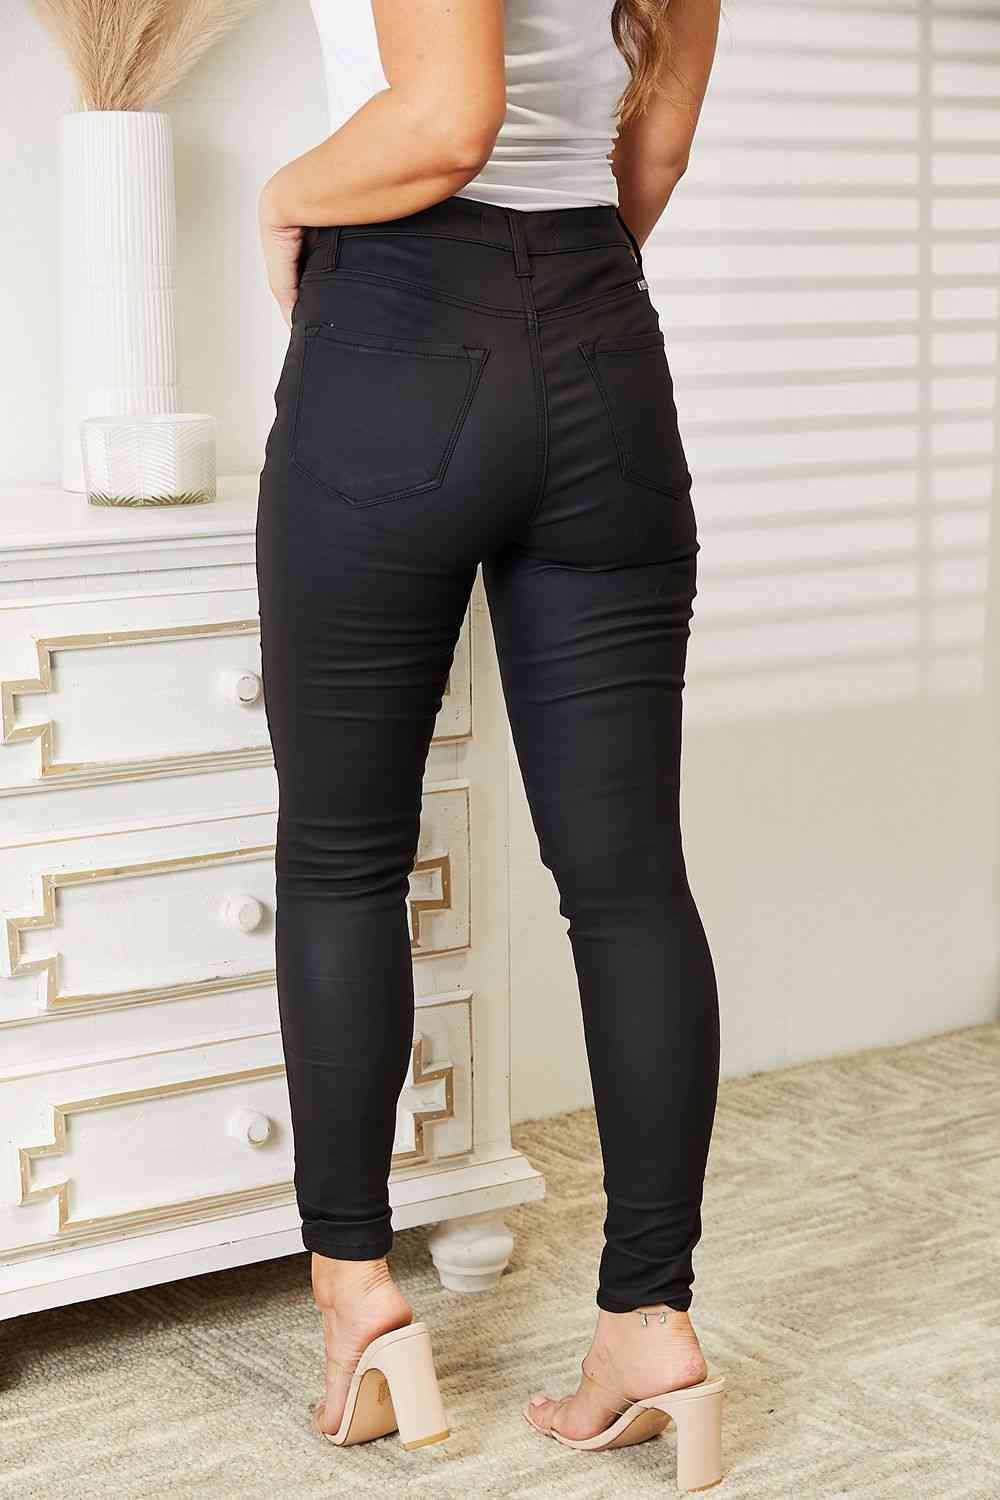 Kancan Full Size High Rise Black Coated Ankle Skinny Jeans - Sizes 0-15 & 16W-22W Ti Amo I love you